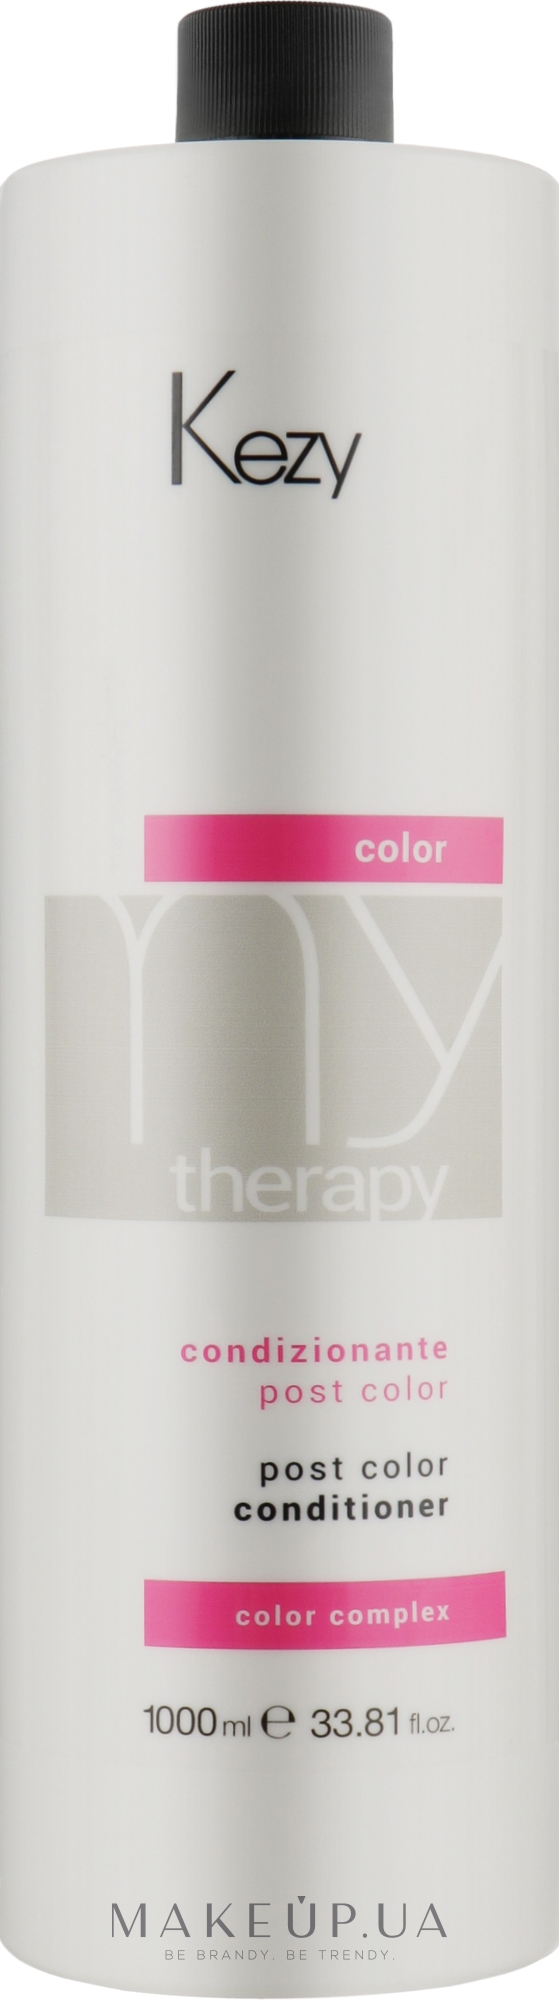 Conditioner for Colored Hair with Pomegranate Extract - Kezy My Therapy Post Color Conditioner — фото 1000ml